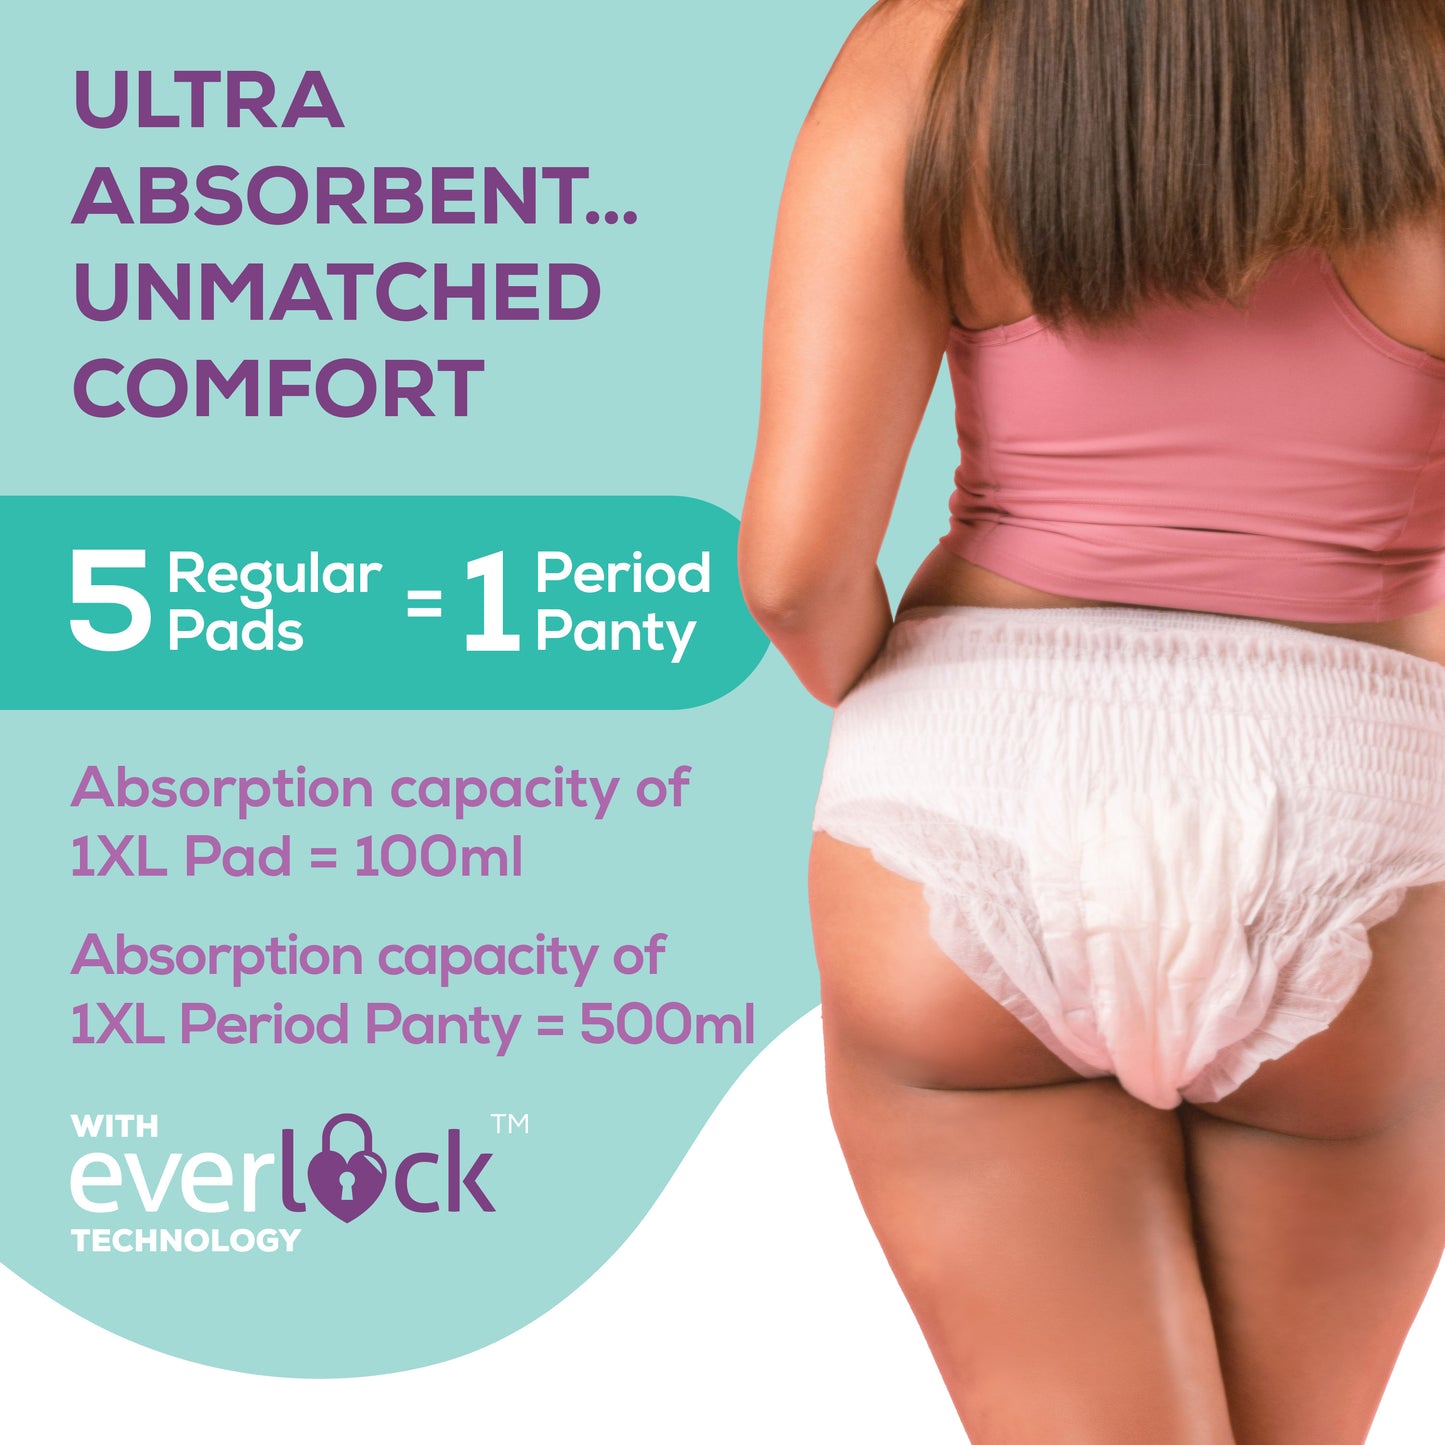 Evereve Ultra Absorbent Disposable Period Panties, L-XL, 2's Pack